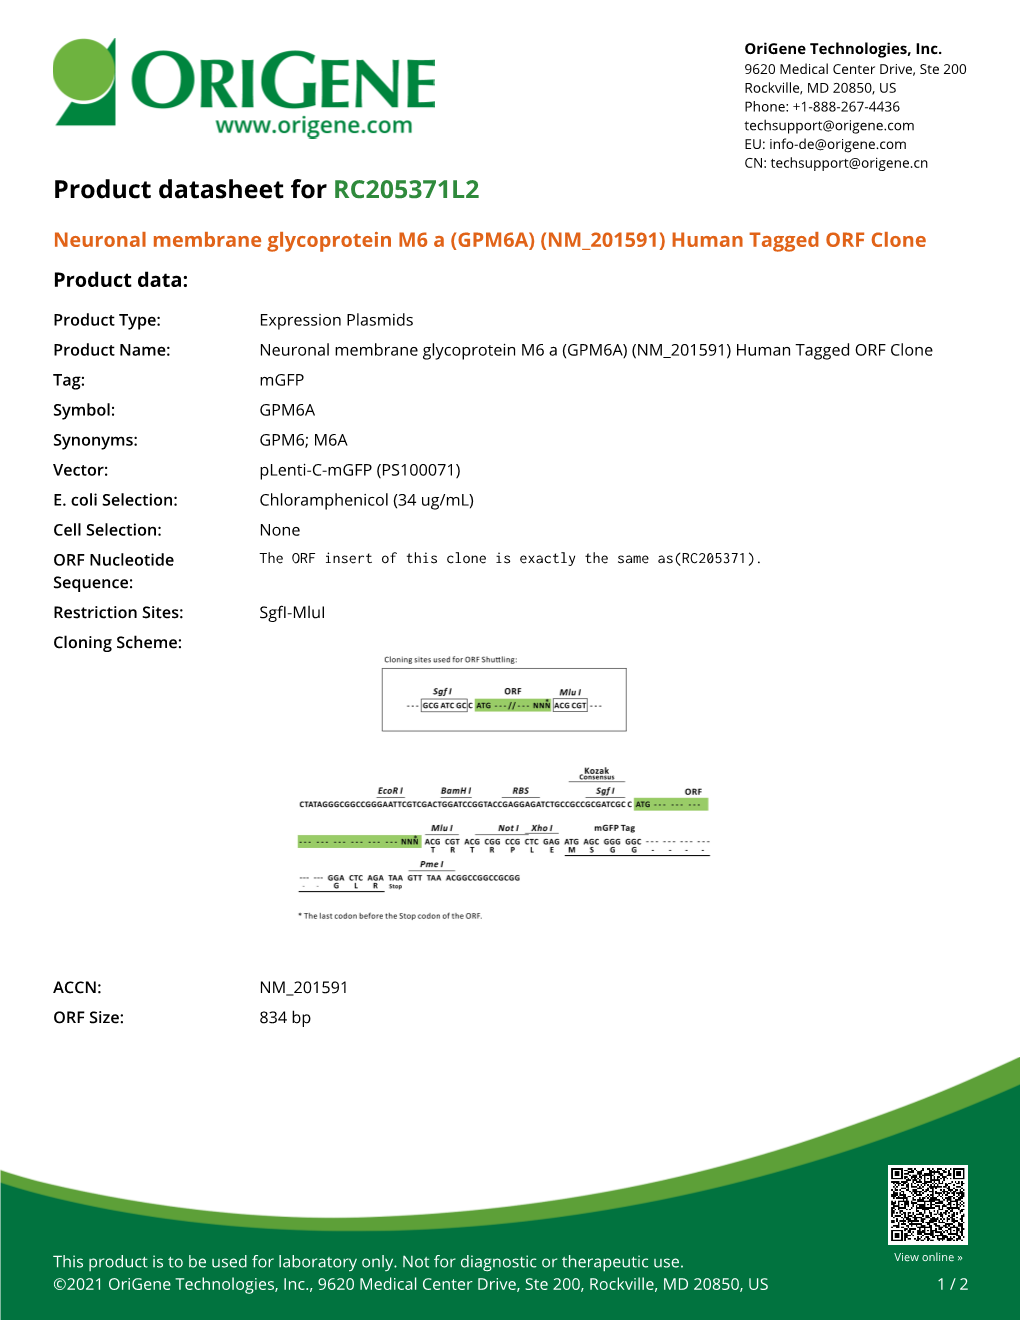 Neuronal Membrane Glycoprotein M6 a (GPM6A) (NM 201591) Human Tagged ORF Clone Product Data